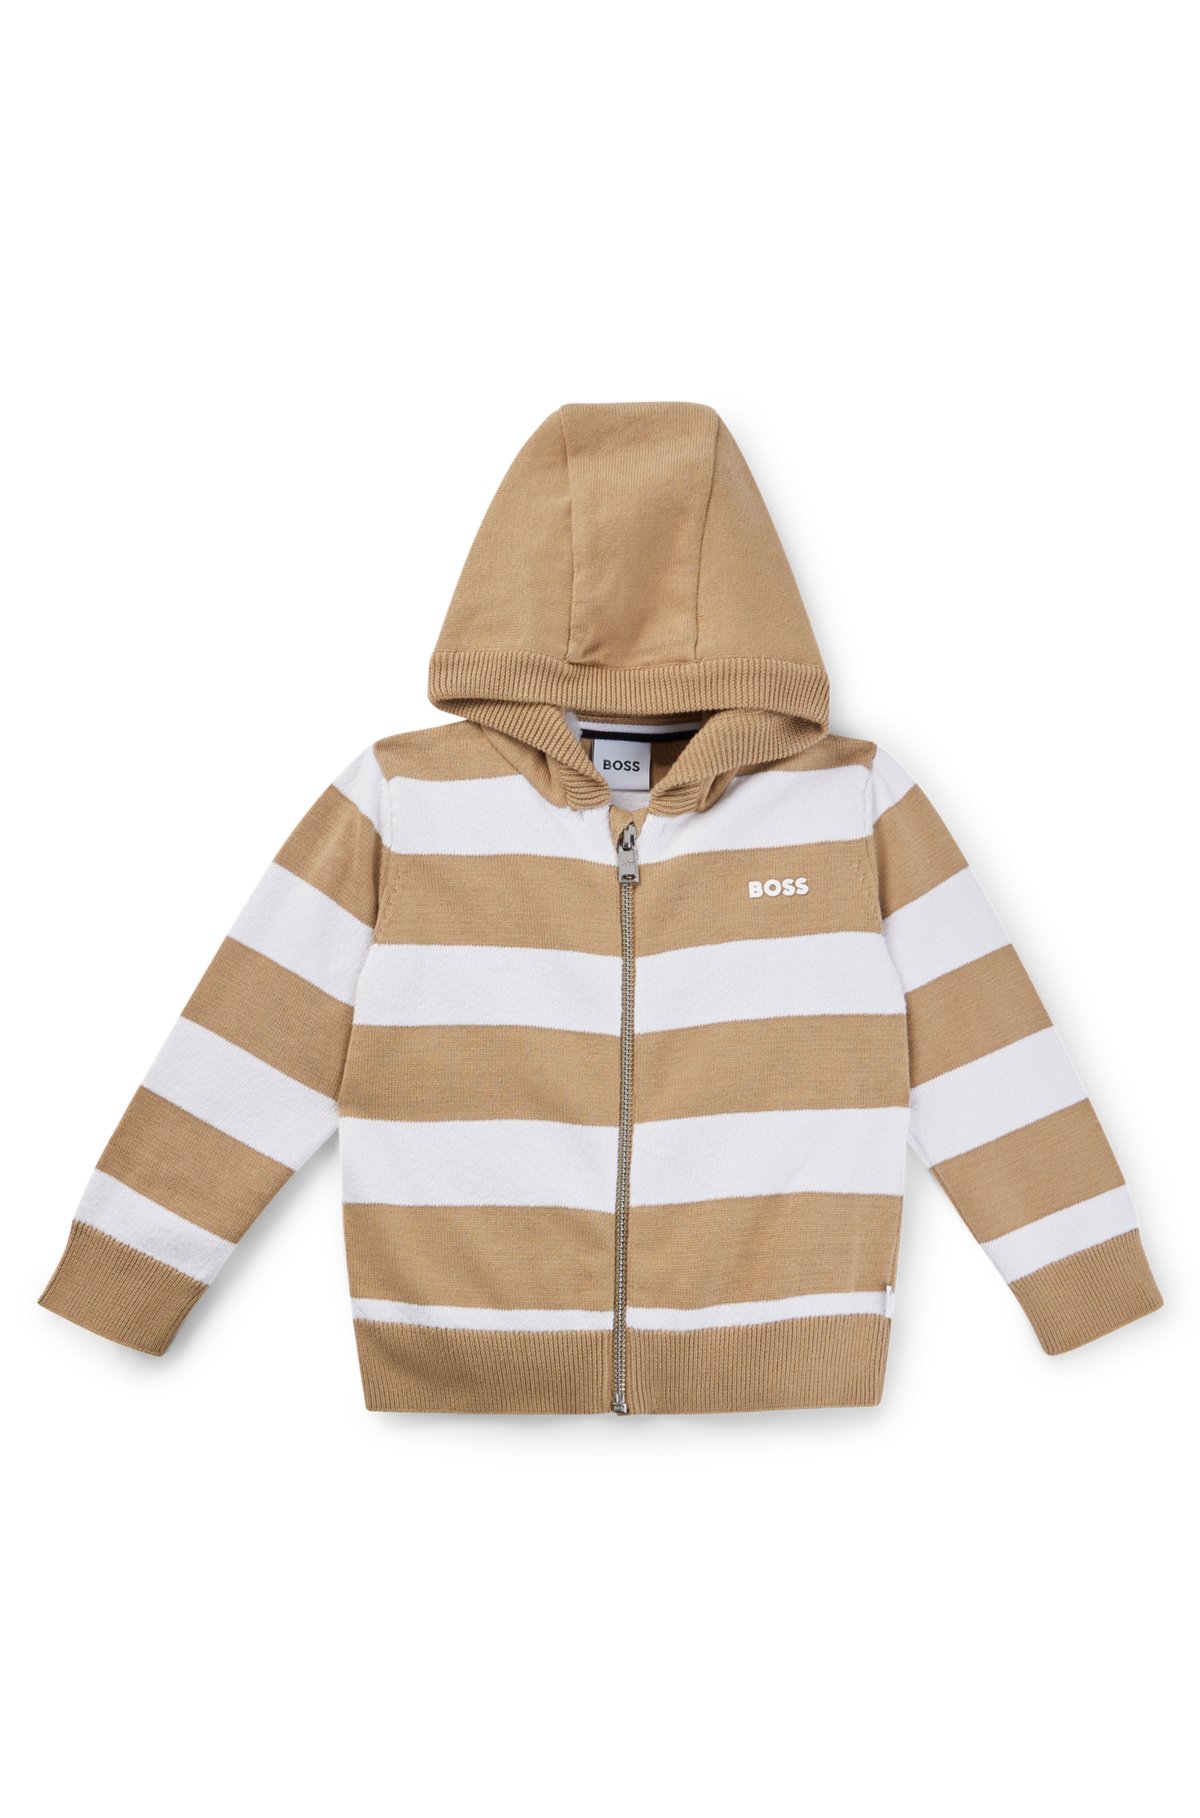 Kids' striped cardigan in cotton with logo print, Patterned